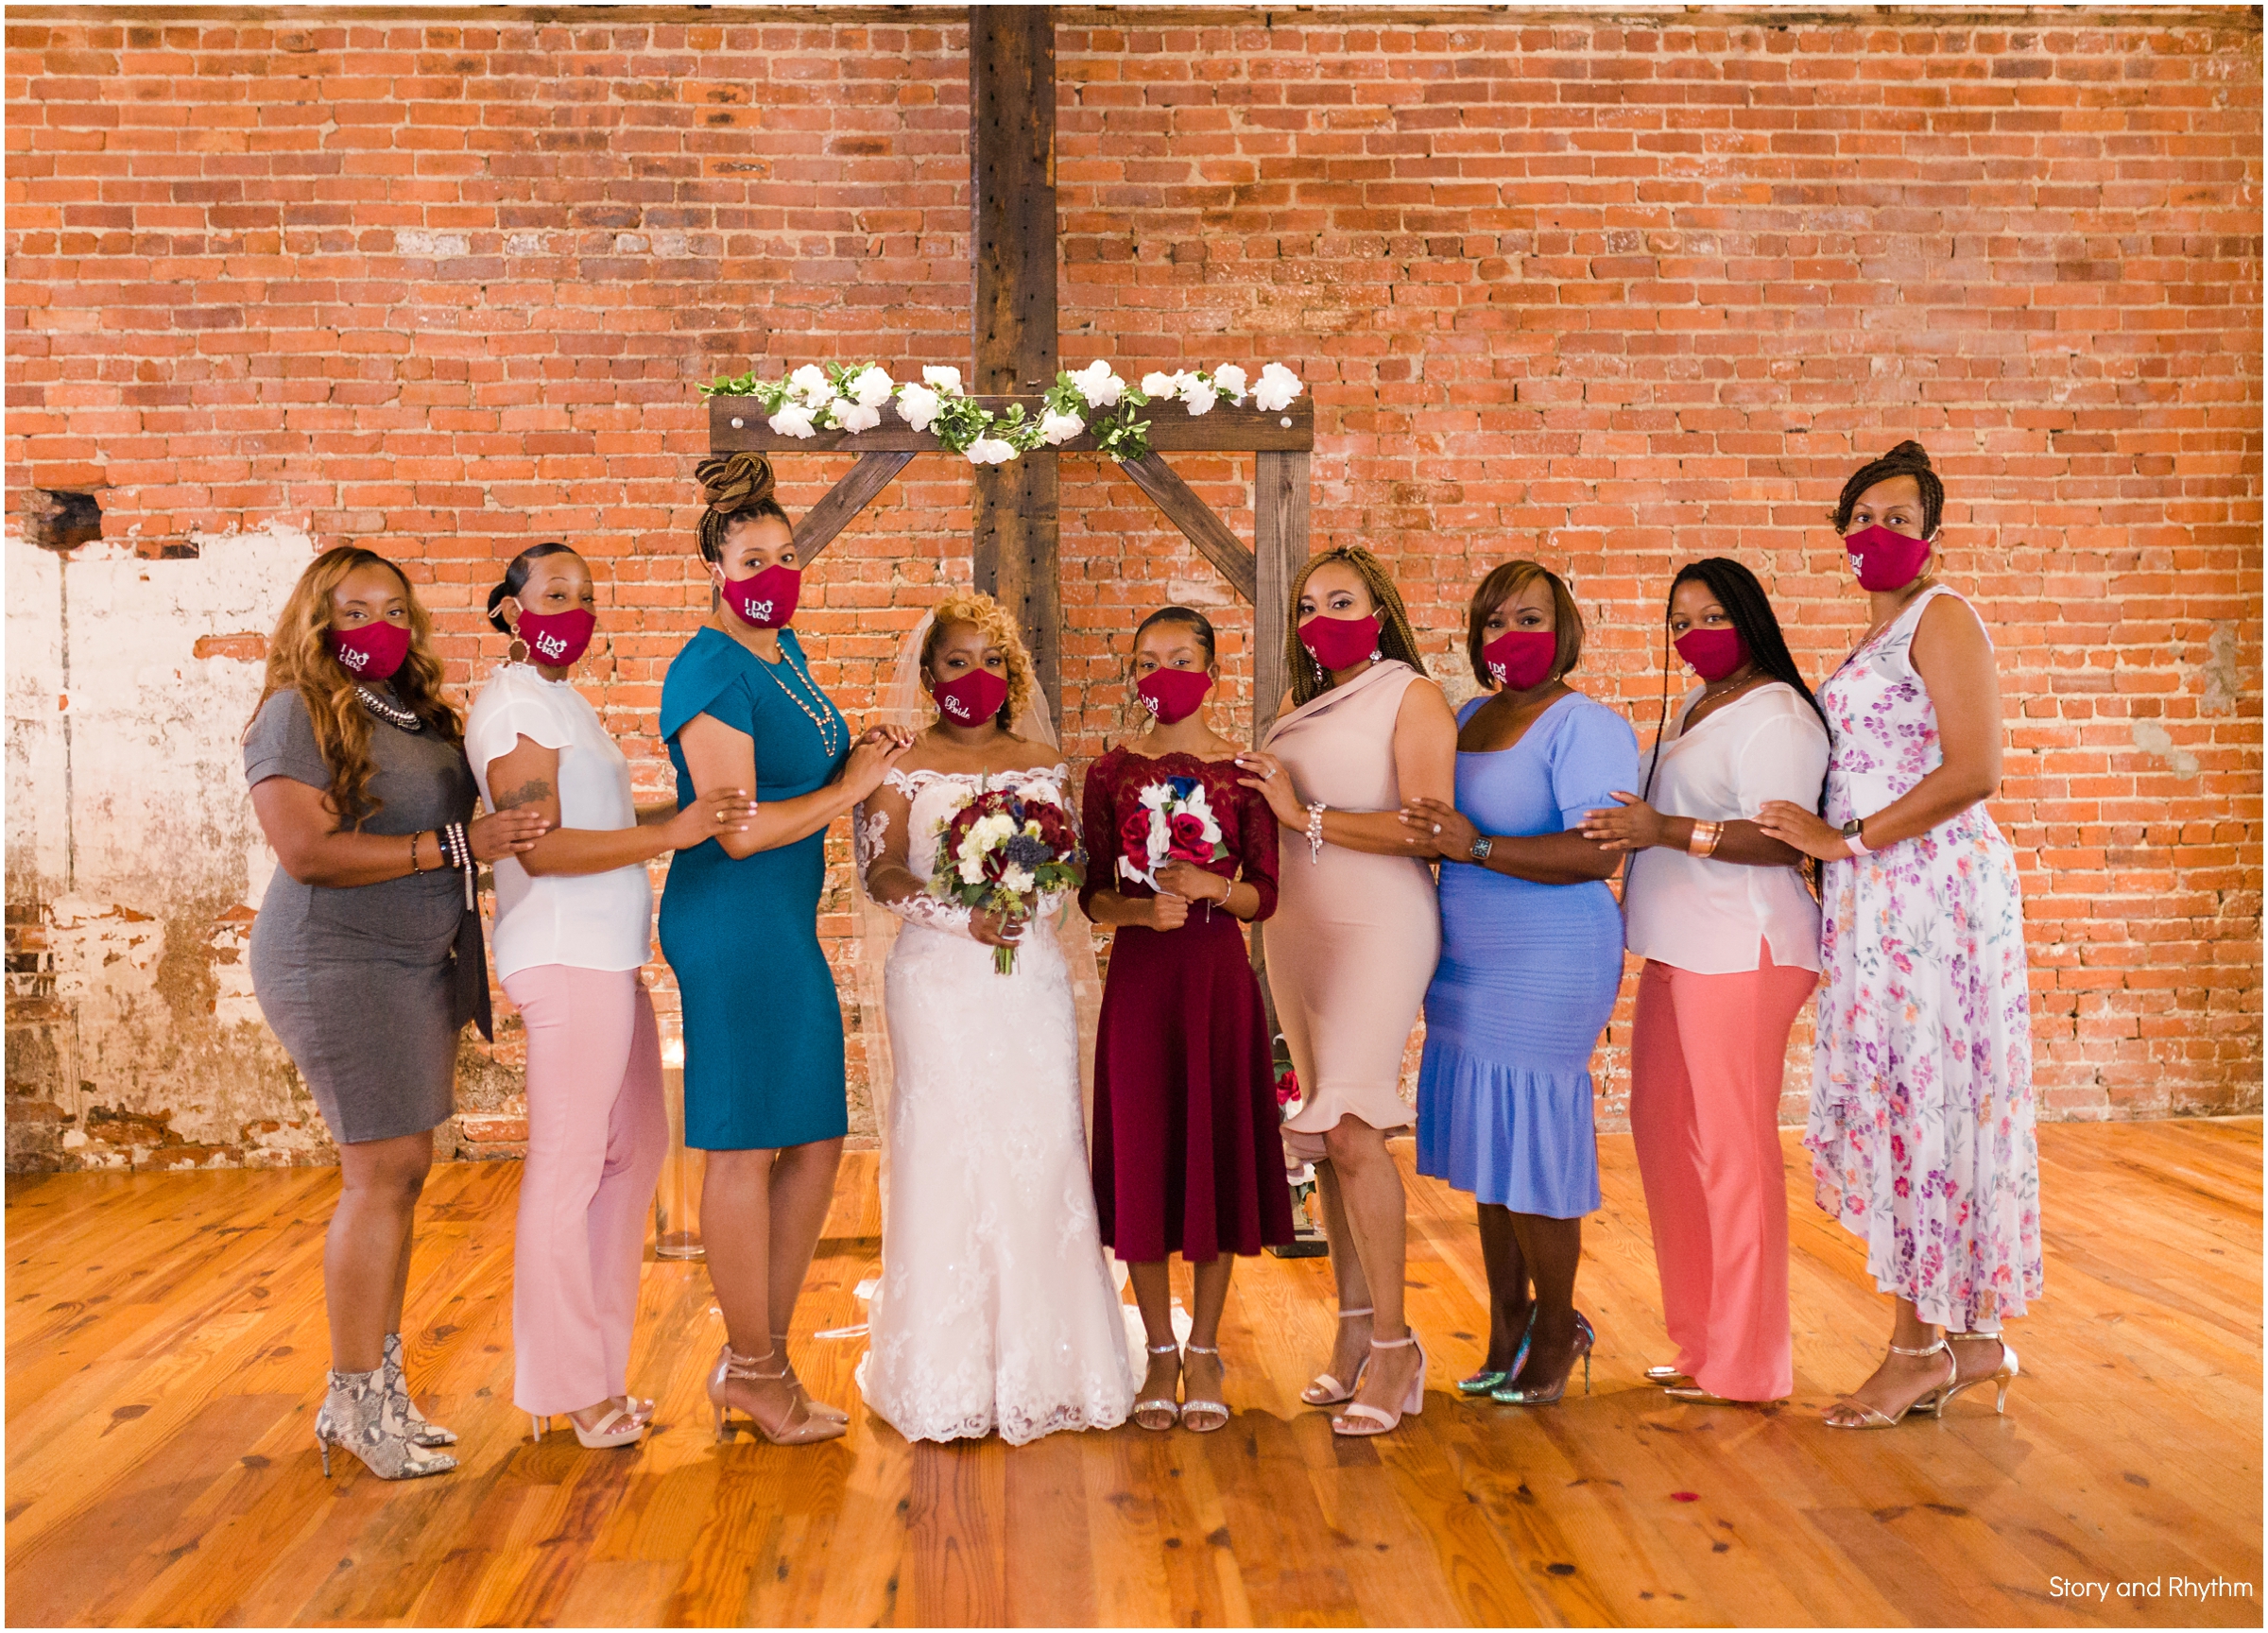 Bridesmaids photos with Covid-19 mask